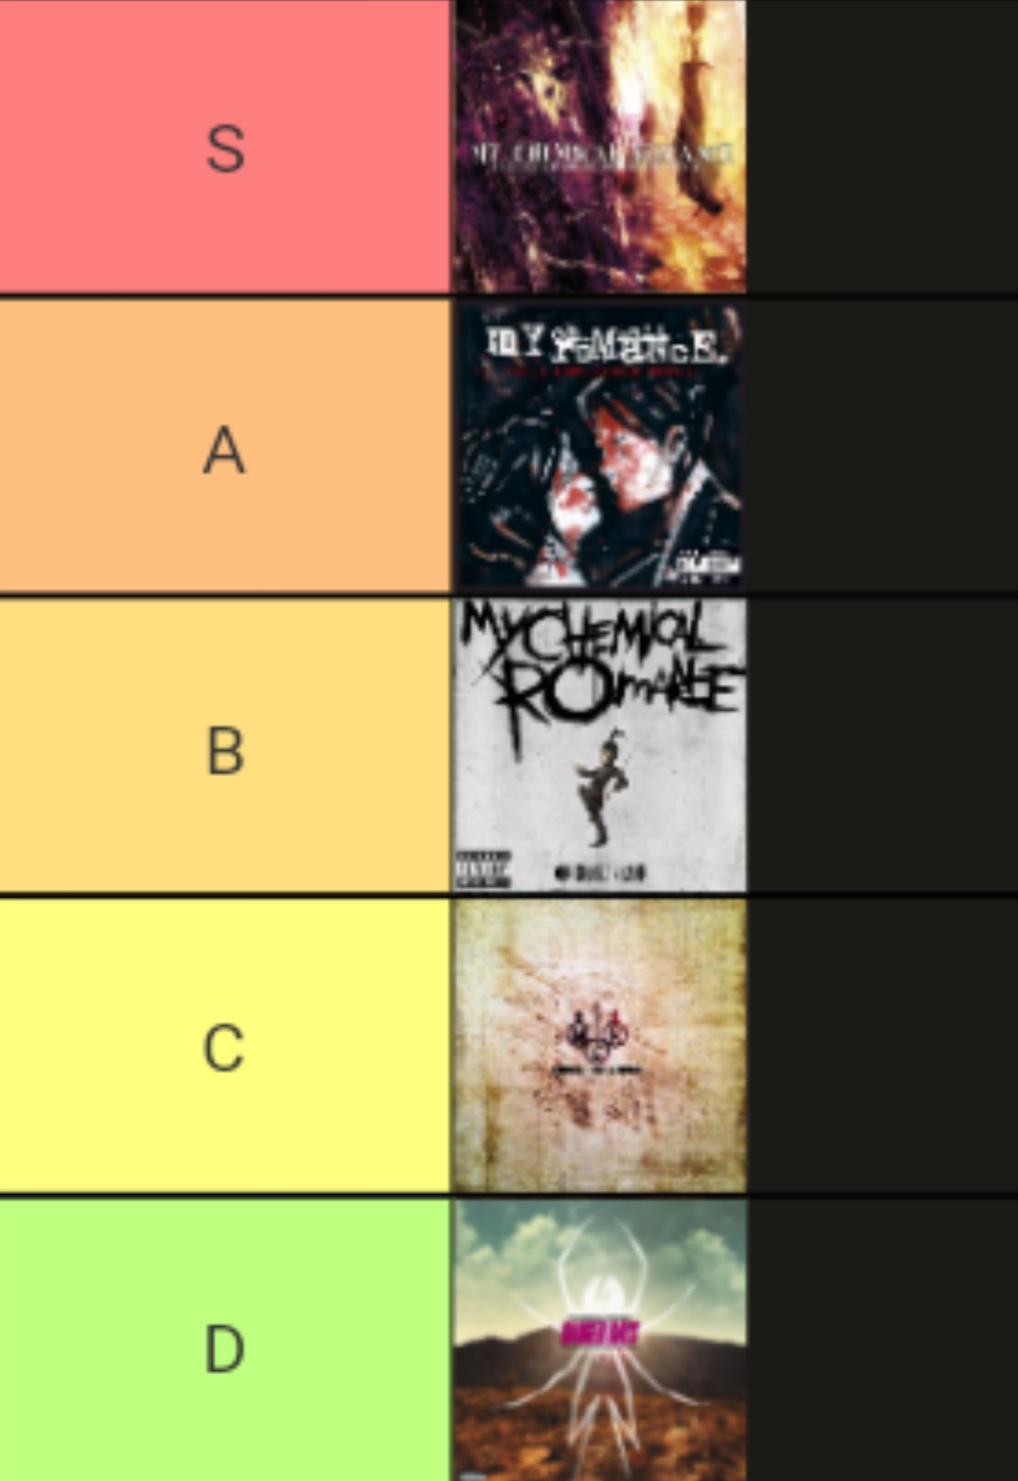 My Ranking Of The Albums From Favourite To Least Favourite Do You